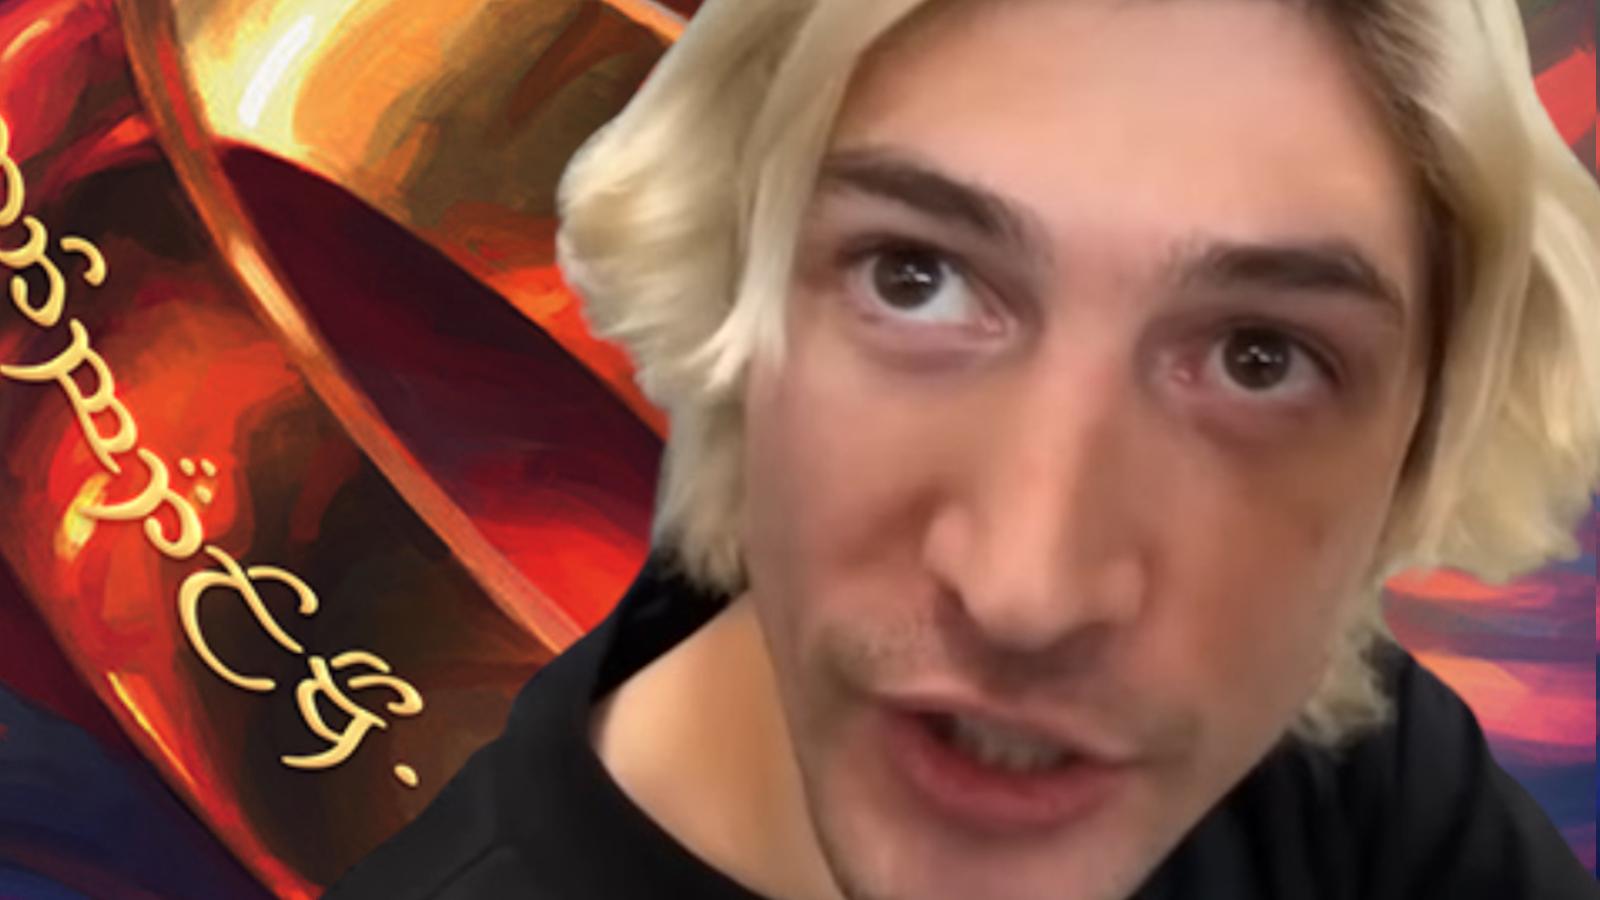 xQc goes full Gollum mode hunting for MTG's $2M LOTR One Ring card - Dexerto